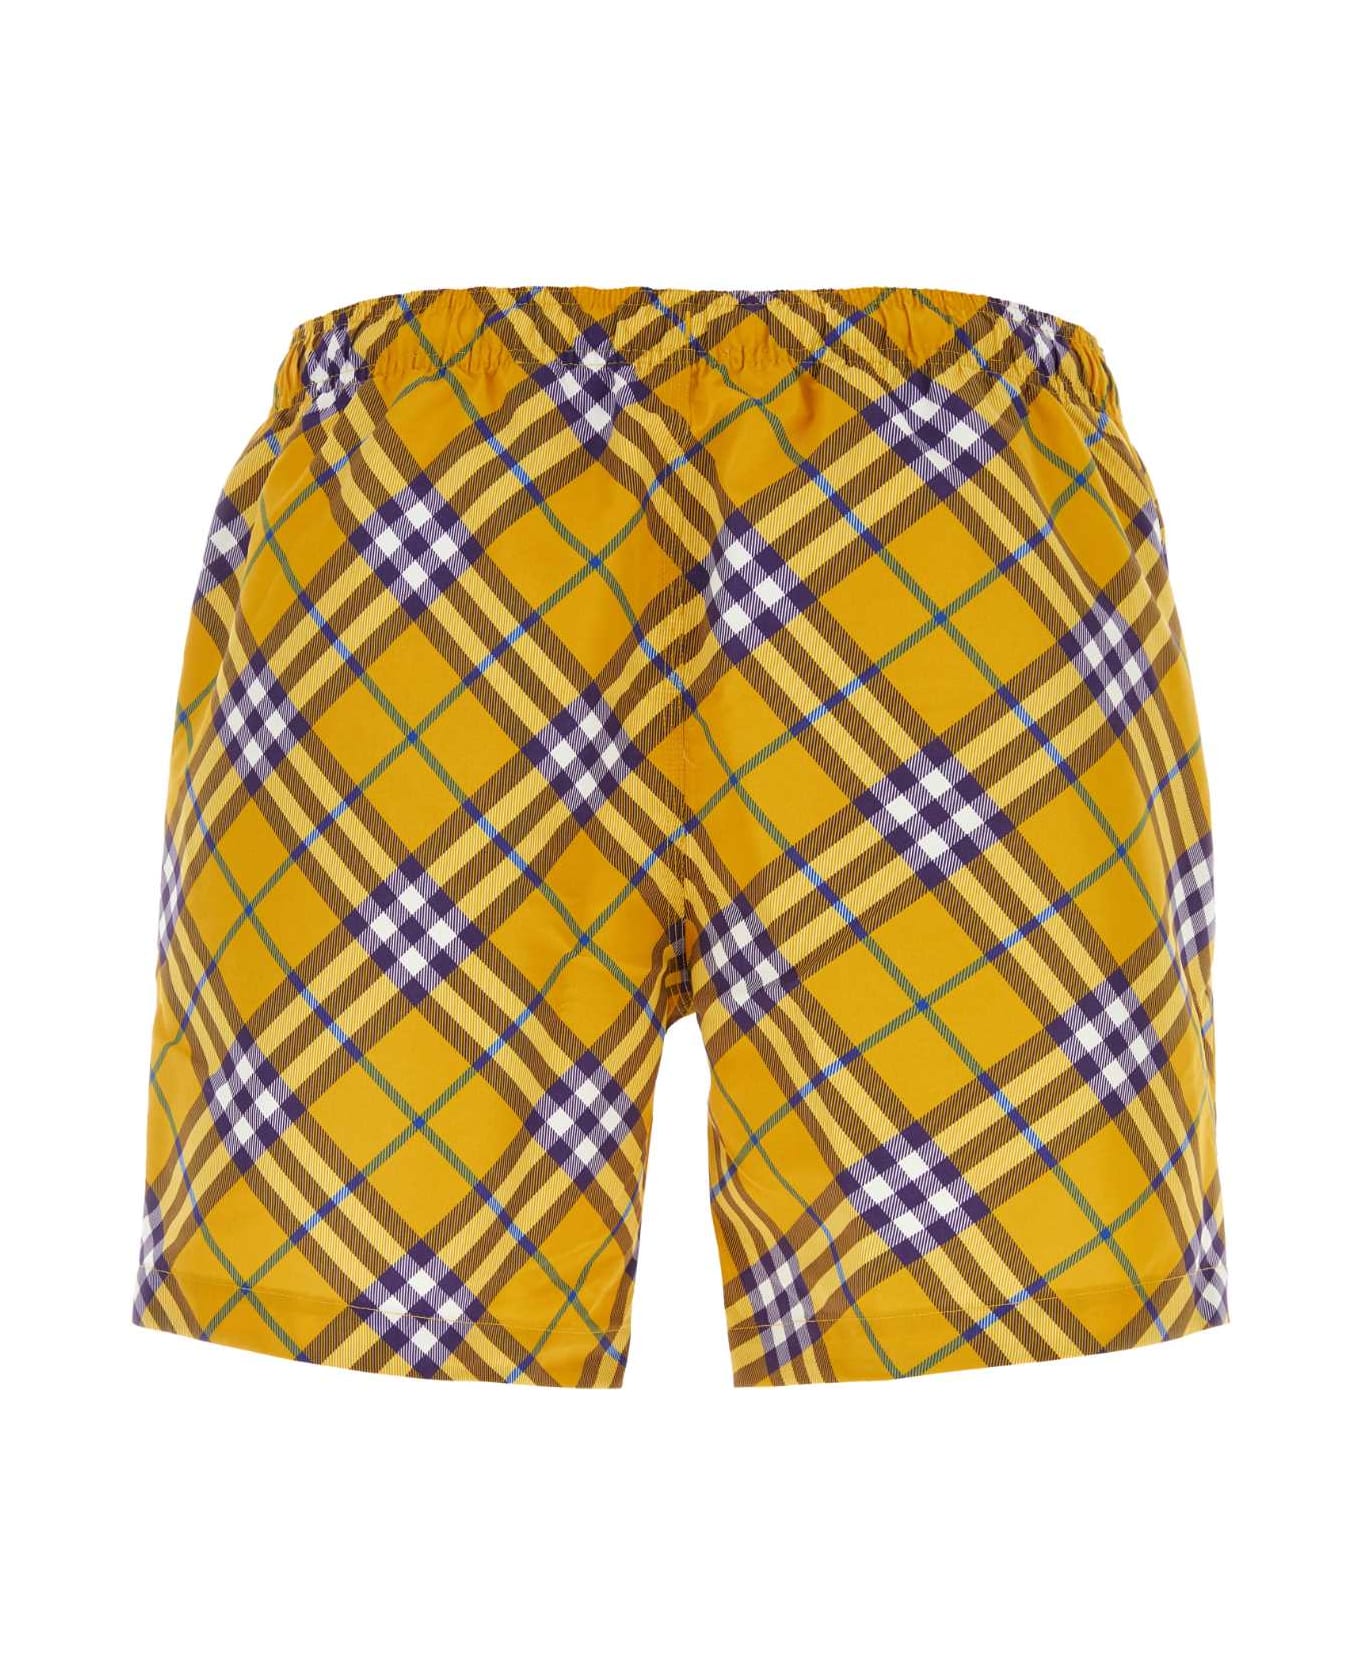 Burberry Printed Polyester Swimming Shorts - PEAR 水着